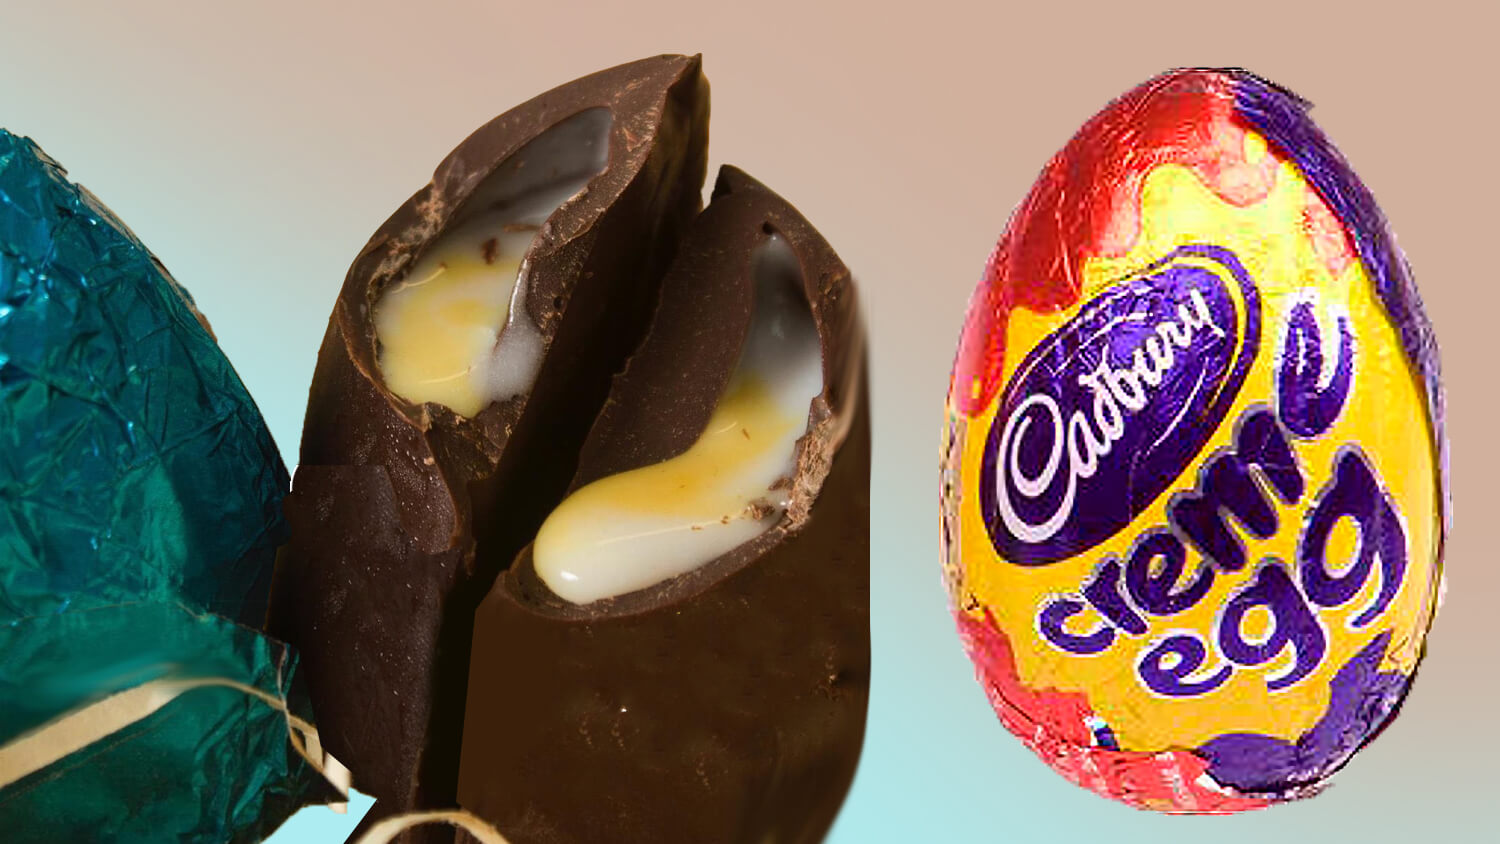 Cadbury just launched an Easter egg version of this beloved chocolate bar